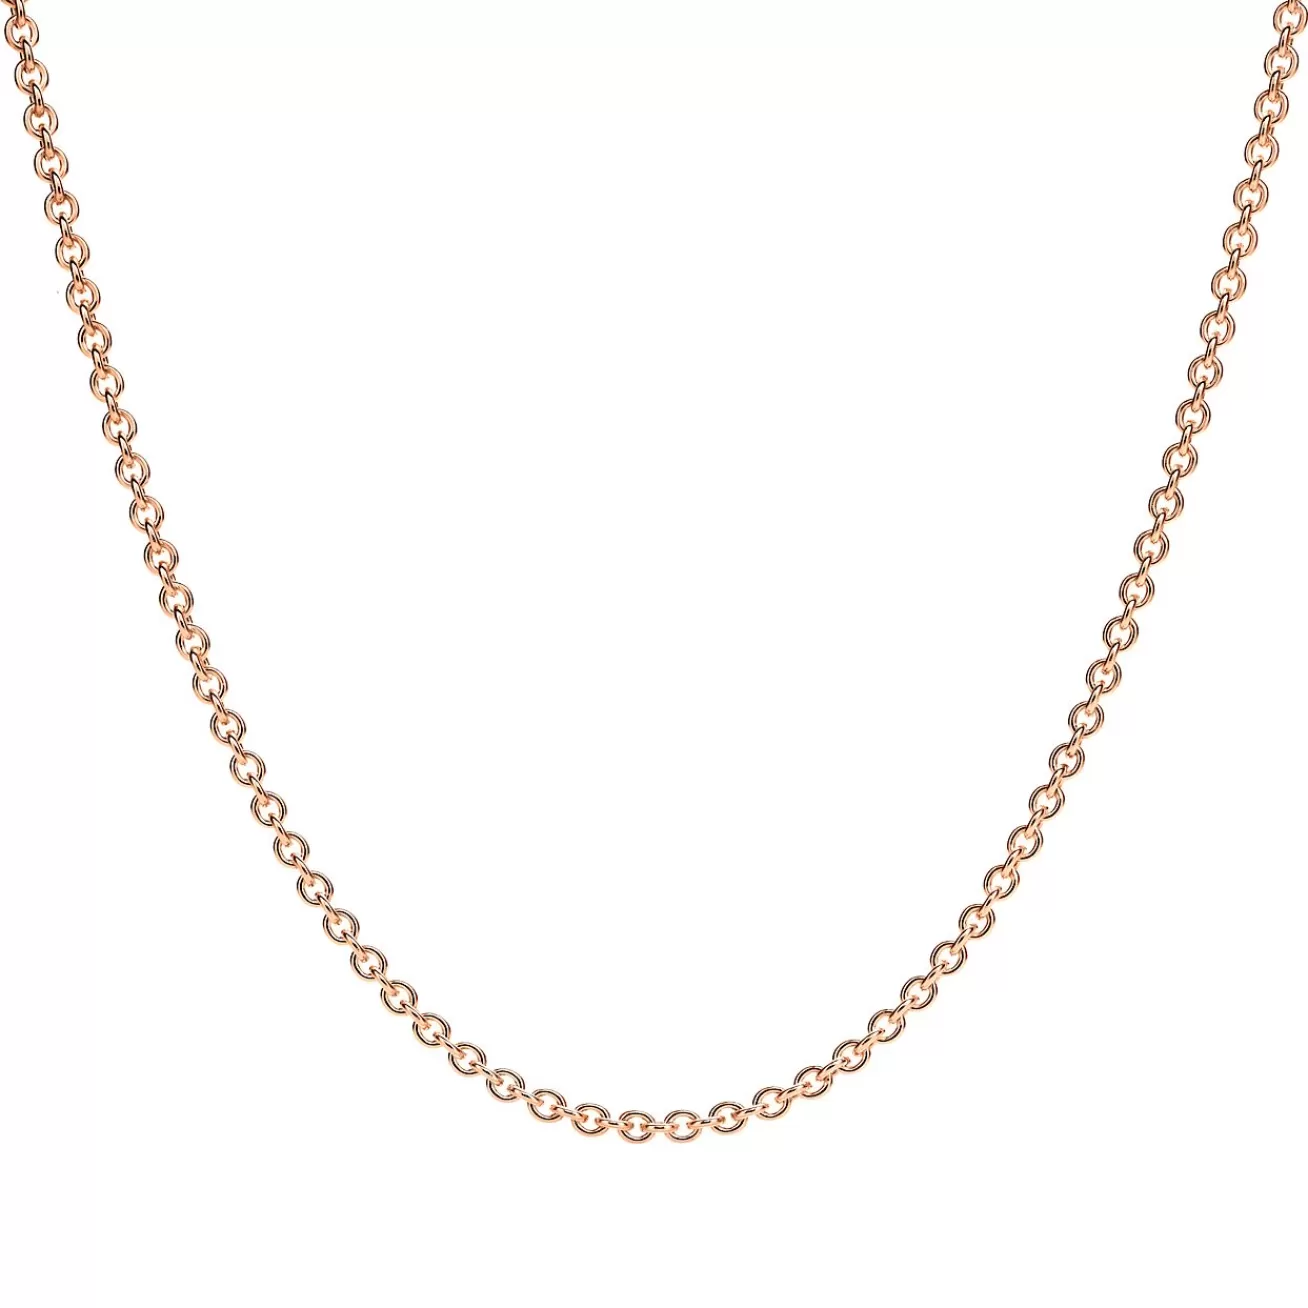 Tiffany & Co. Chain in 18k rose gold, 18" long. | ^ Necklaces & Pendants | Rose Gold Jewelry